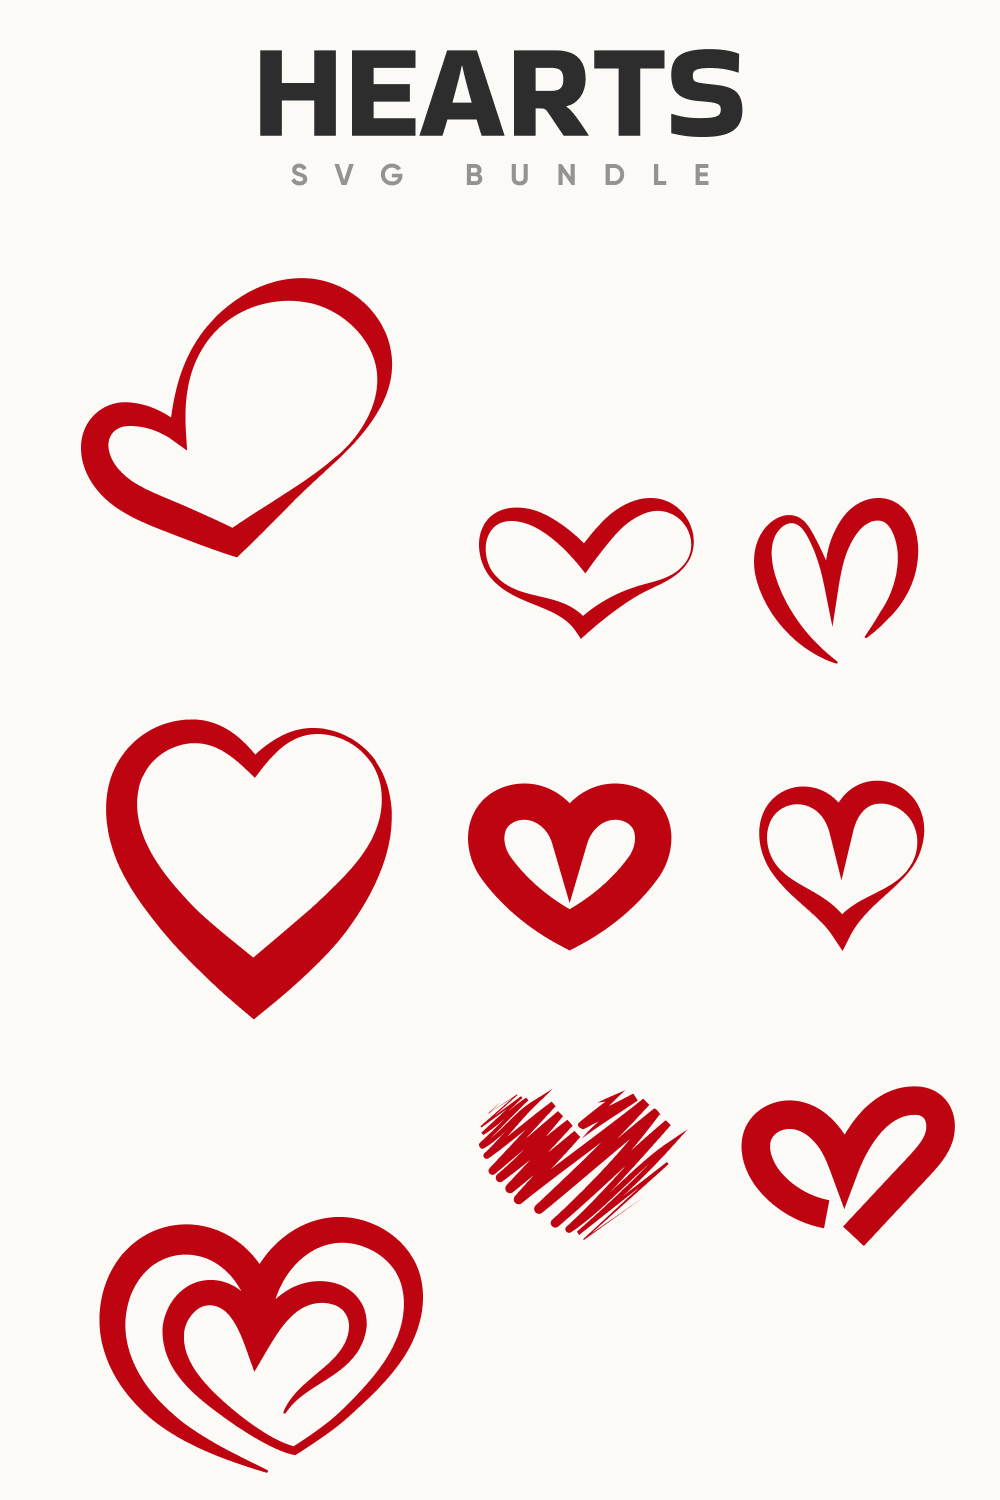 Diverse of the red hearts for you.